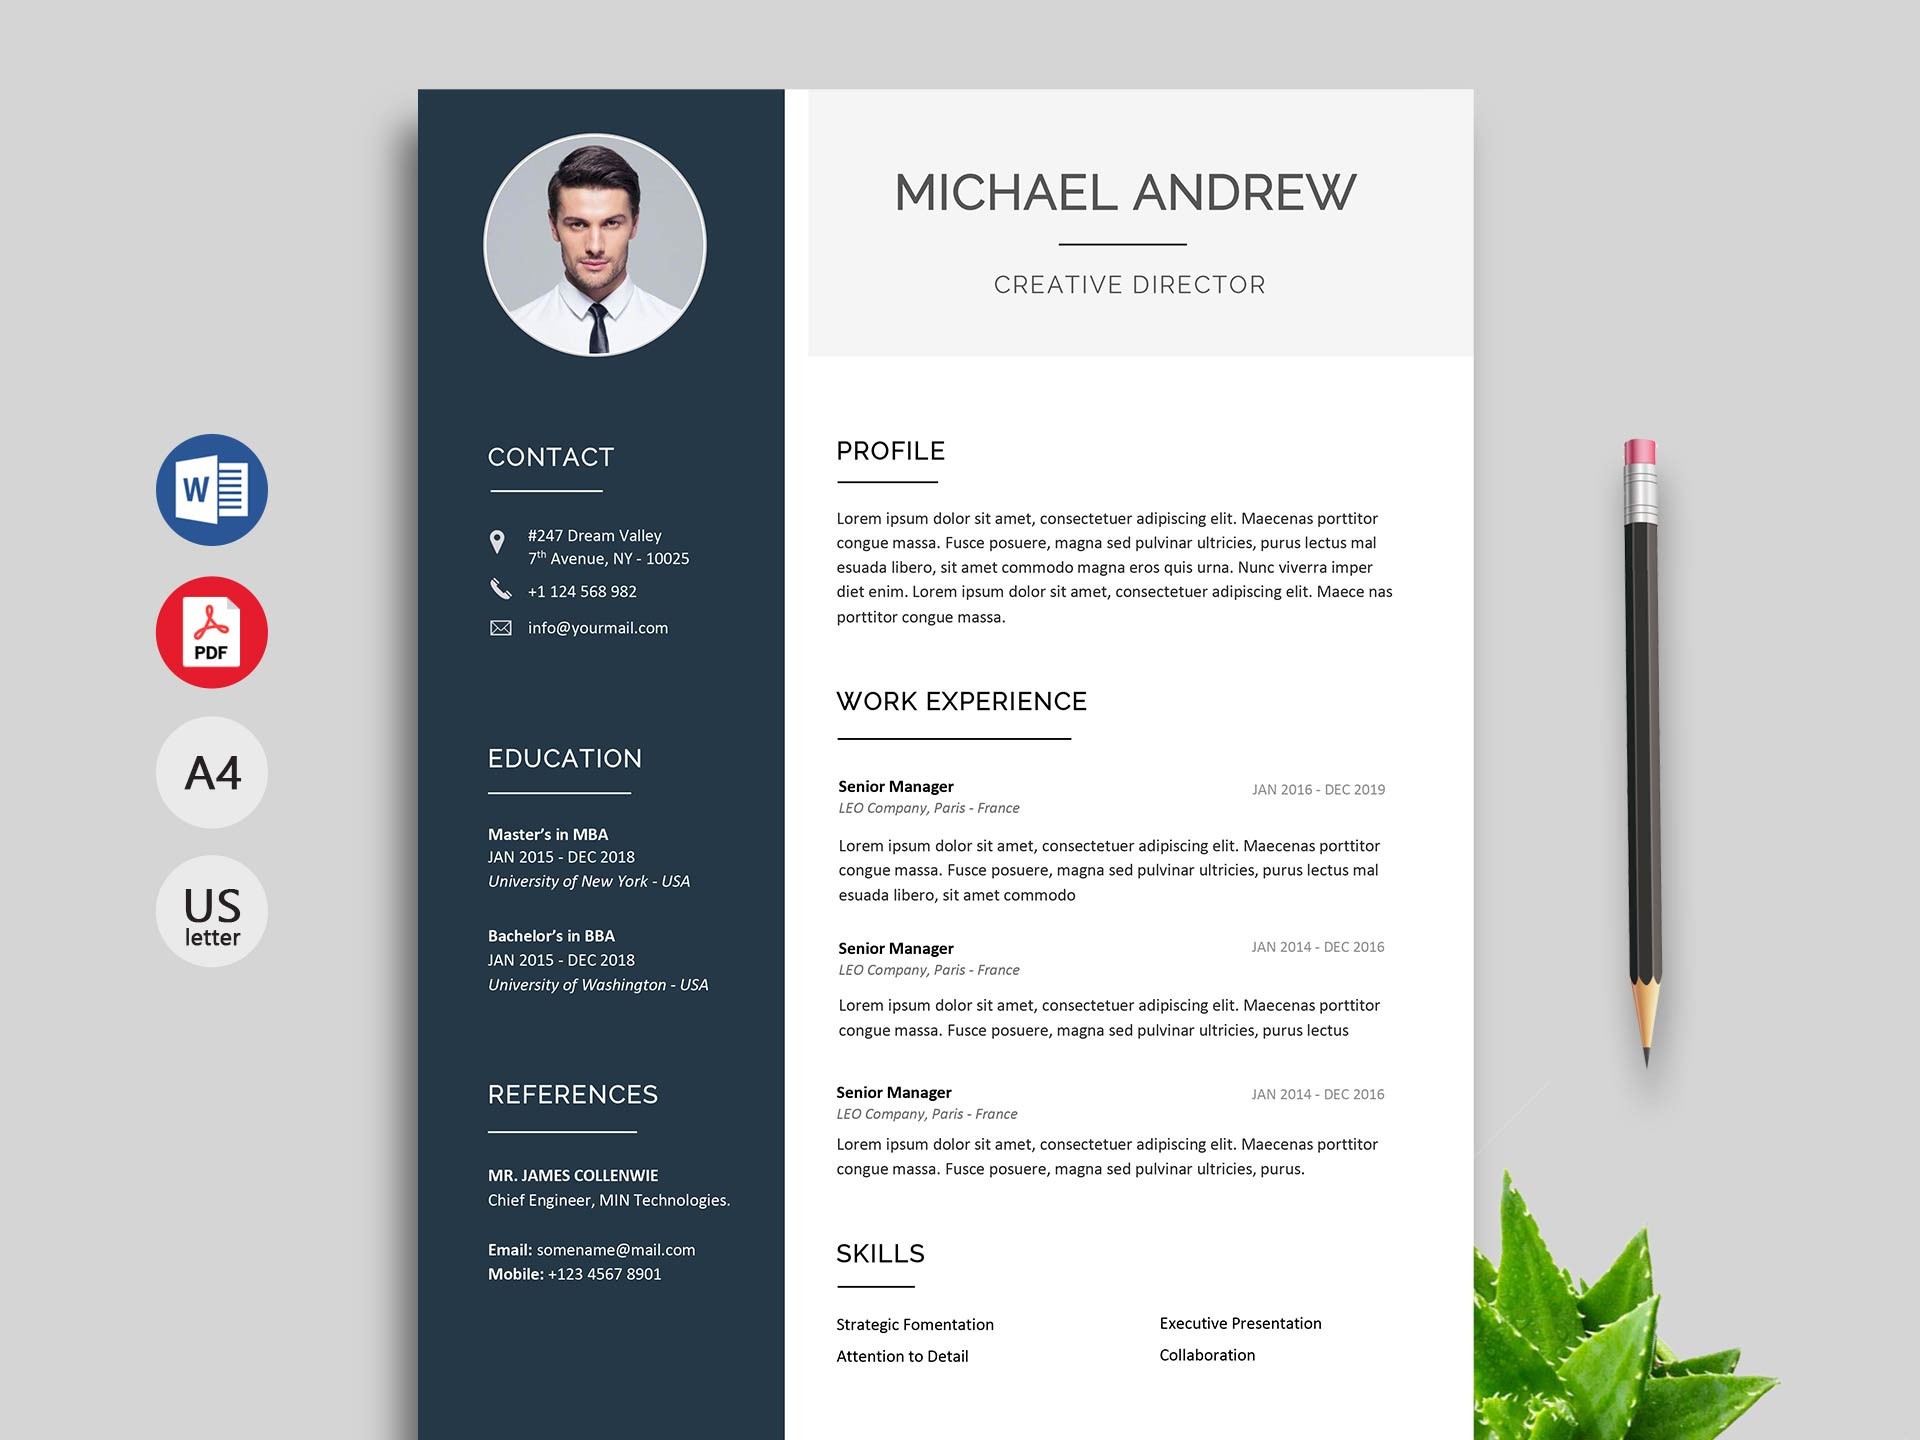 Resume and Cv Templates Free Download 150 Creative Resume & Cv Template Free Download 2021 Resumekraft